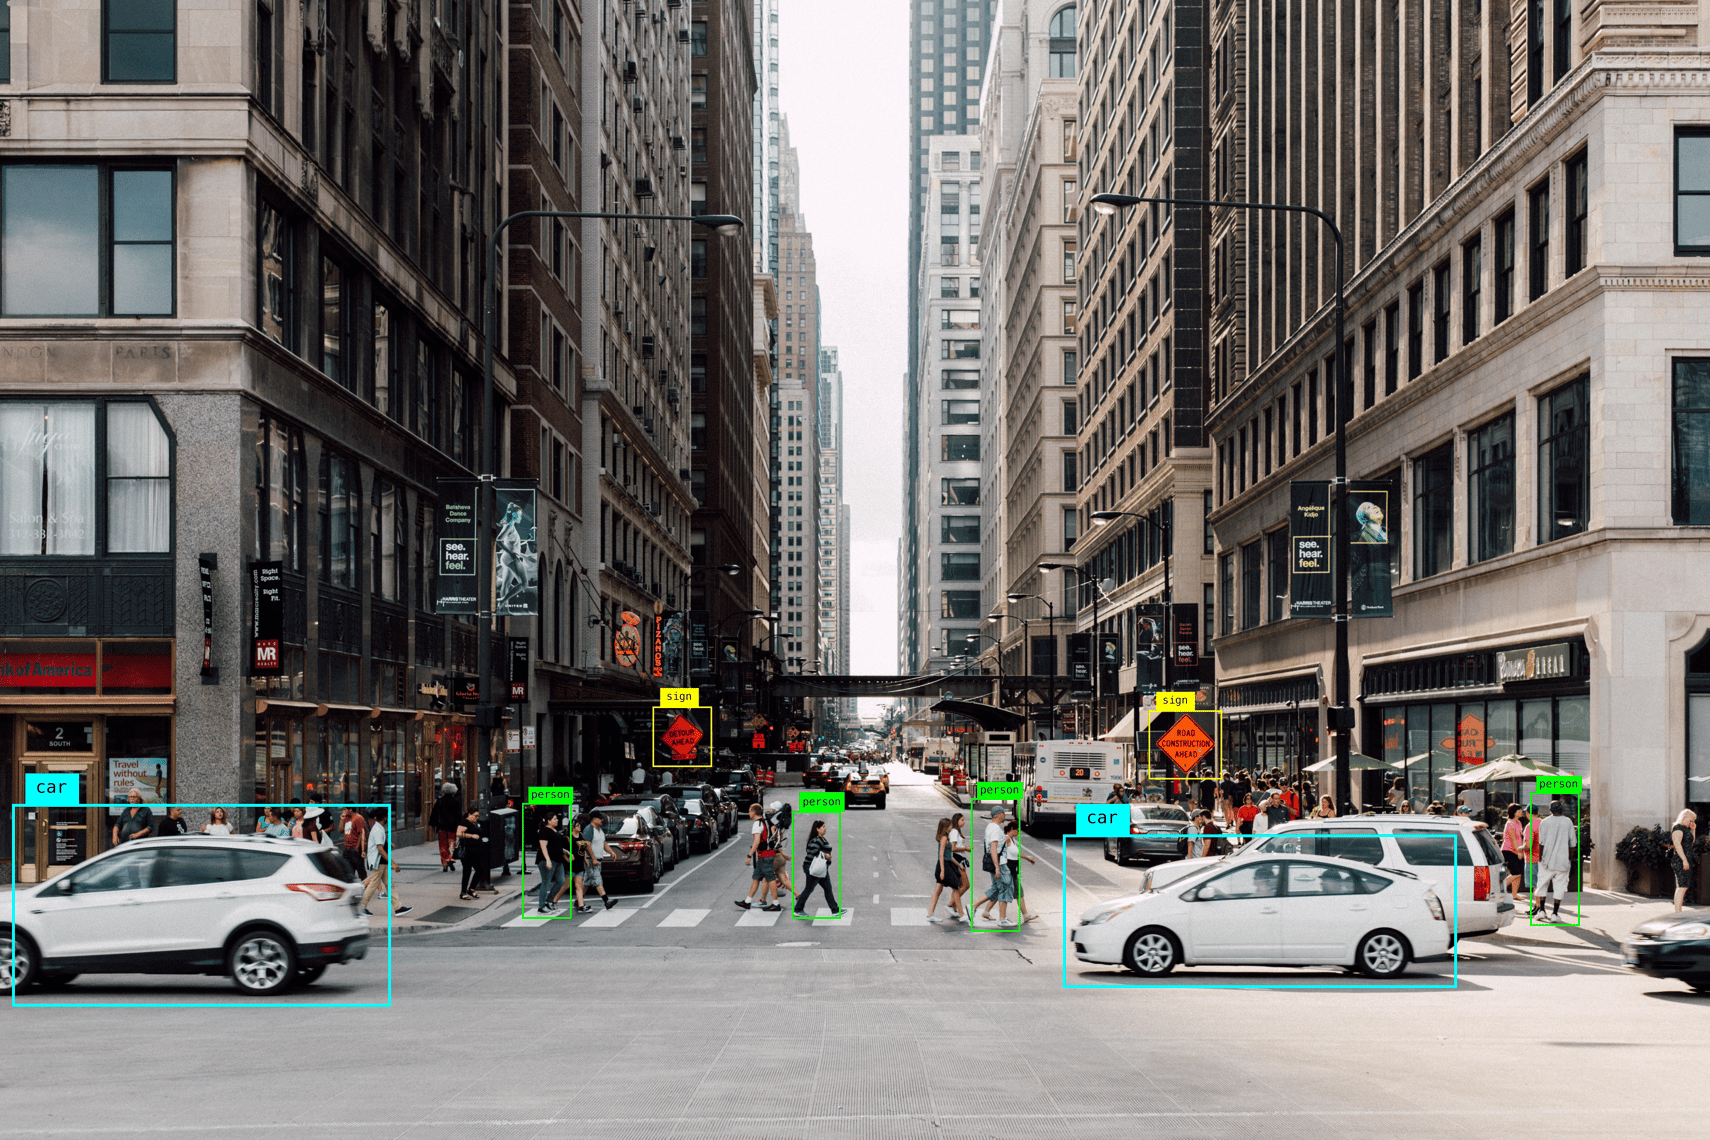 Computer vision being used for traffic analytics